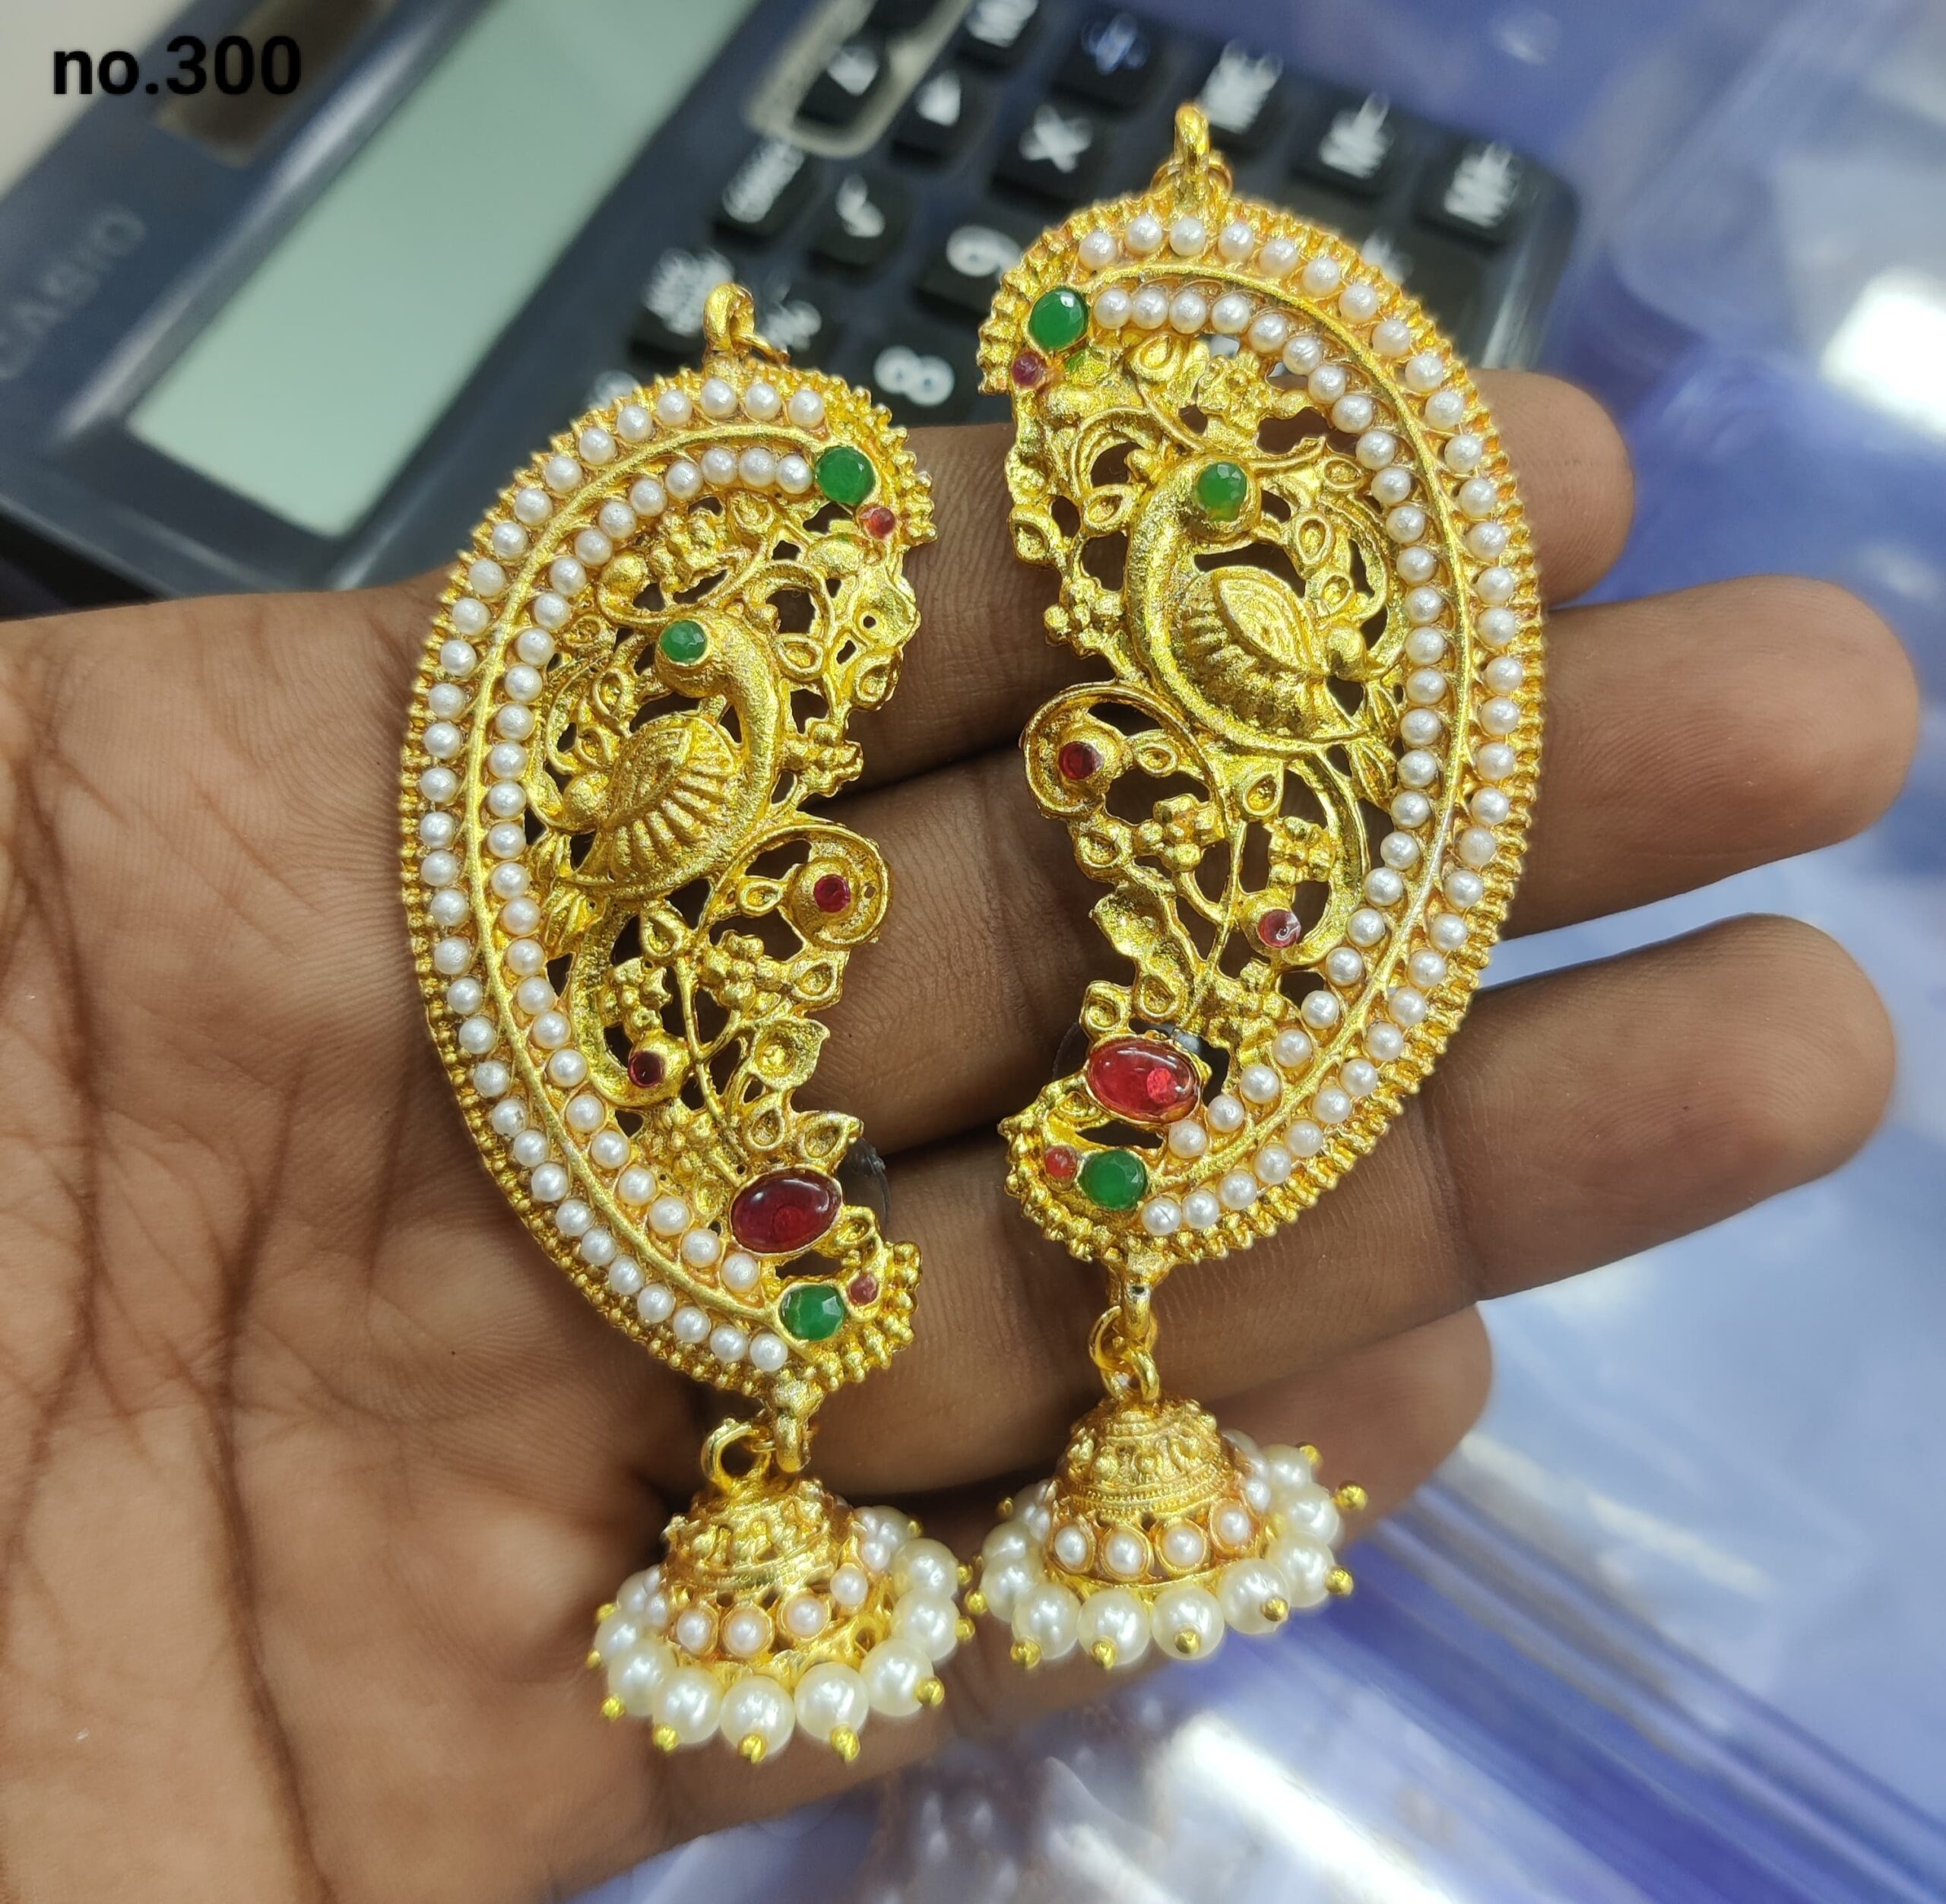 Ear Jewelry - Buy Ear Jewelry online at Best Prices in India | Flipkart.com